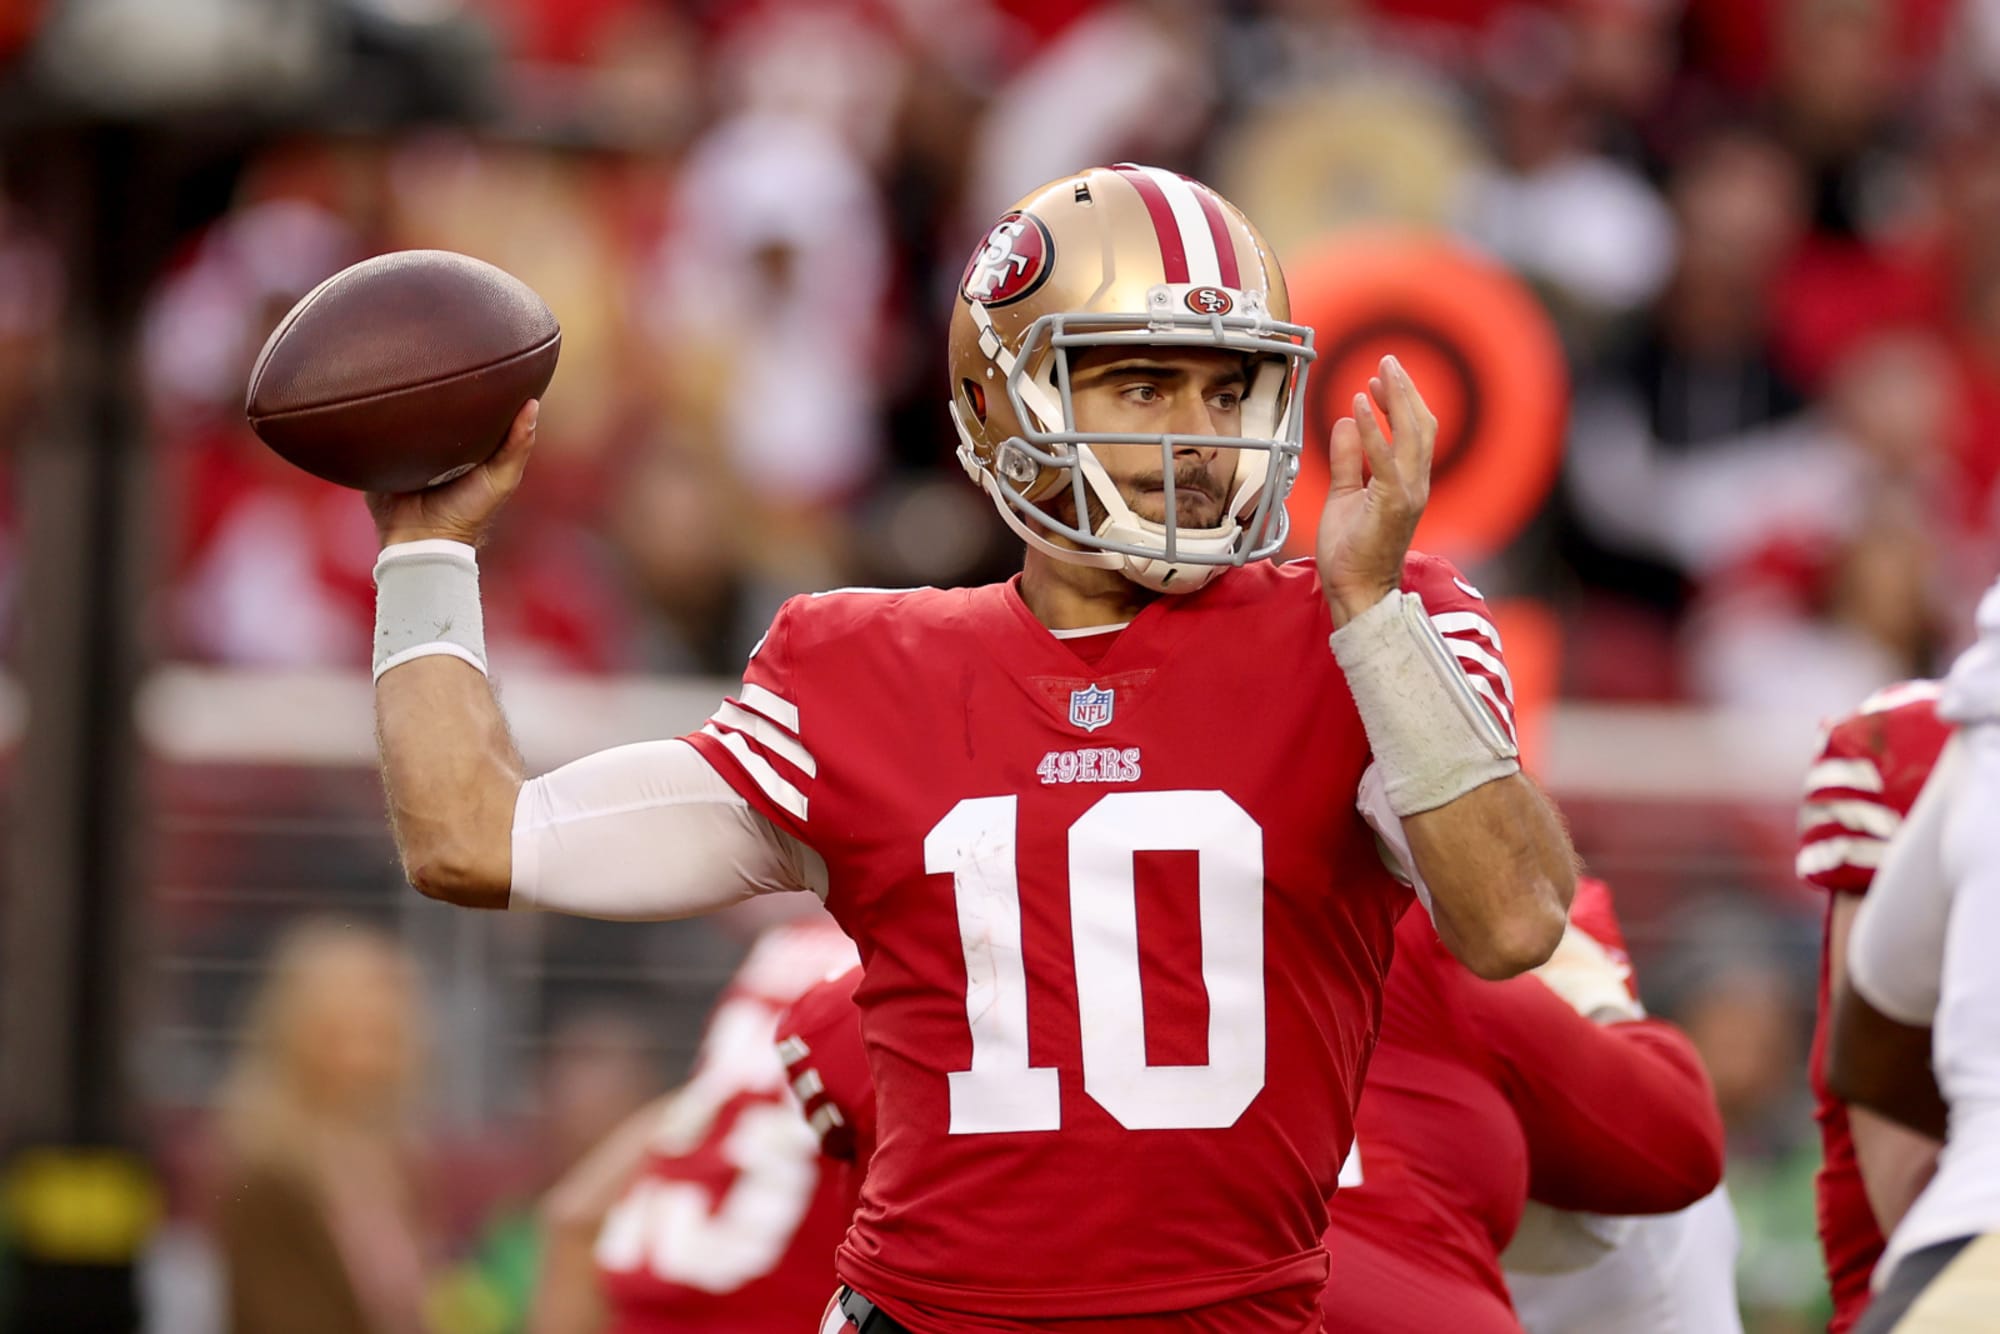 49ers injury updates: Is Jimmy Garoppolo playing today? (Jan. 22)